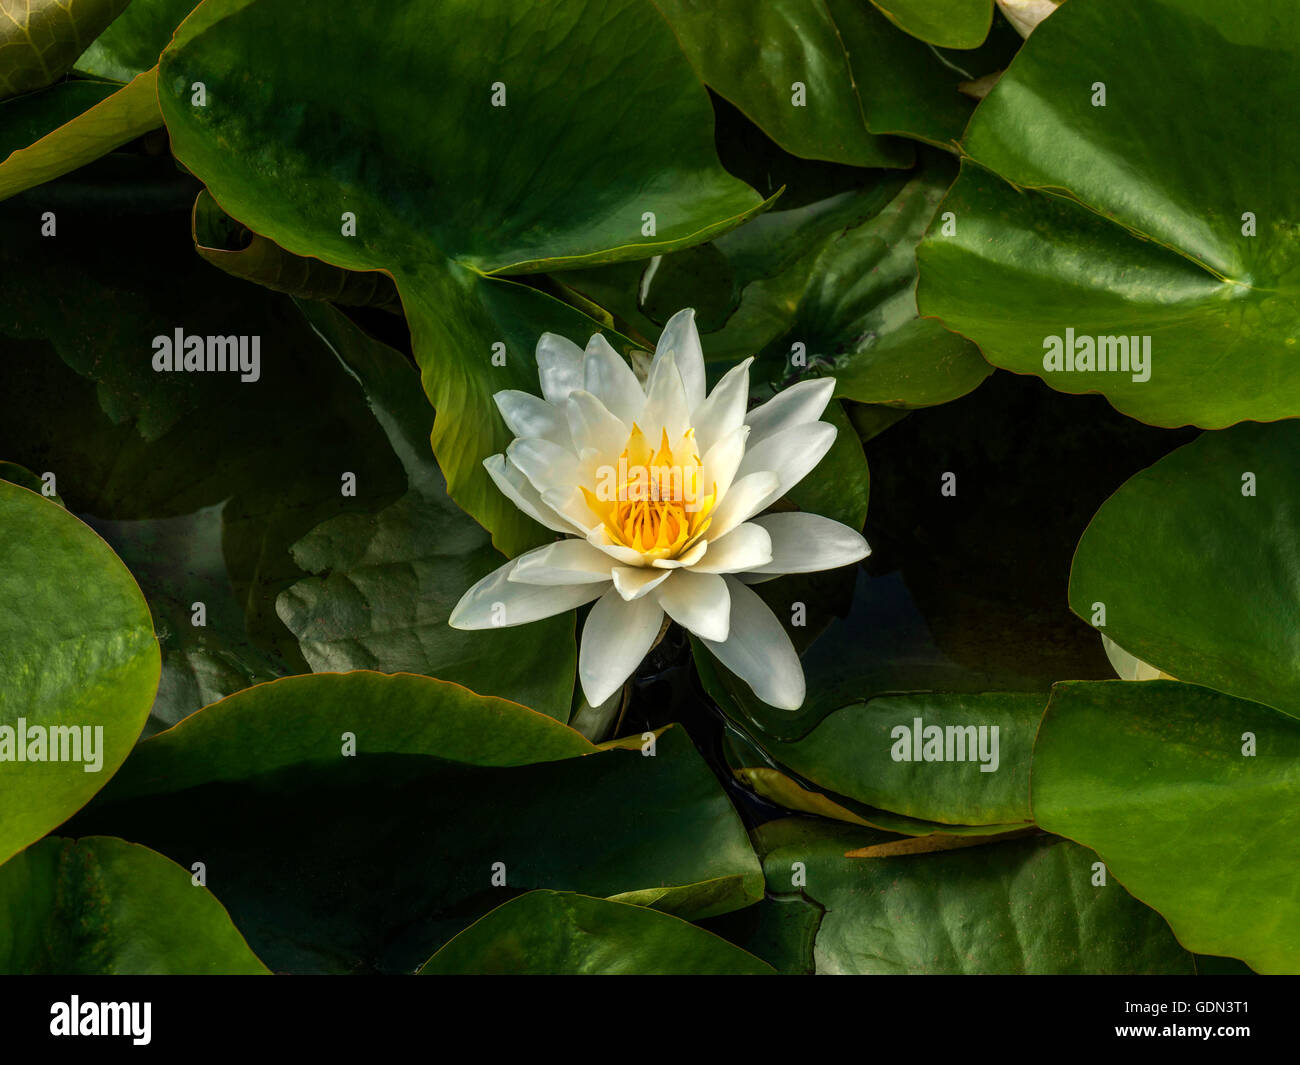 Beautiful white and yellow water lily (Nymphaeaceae) depicted in a pond setting surrounded by green leafage. Stock Photo